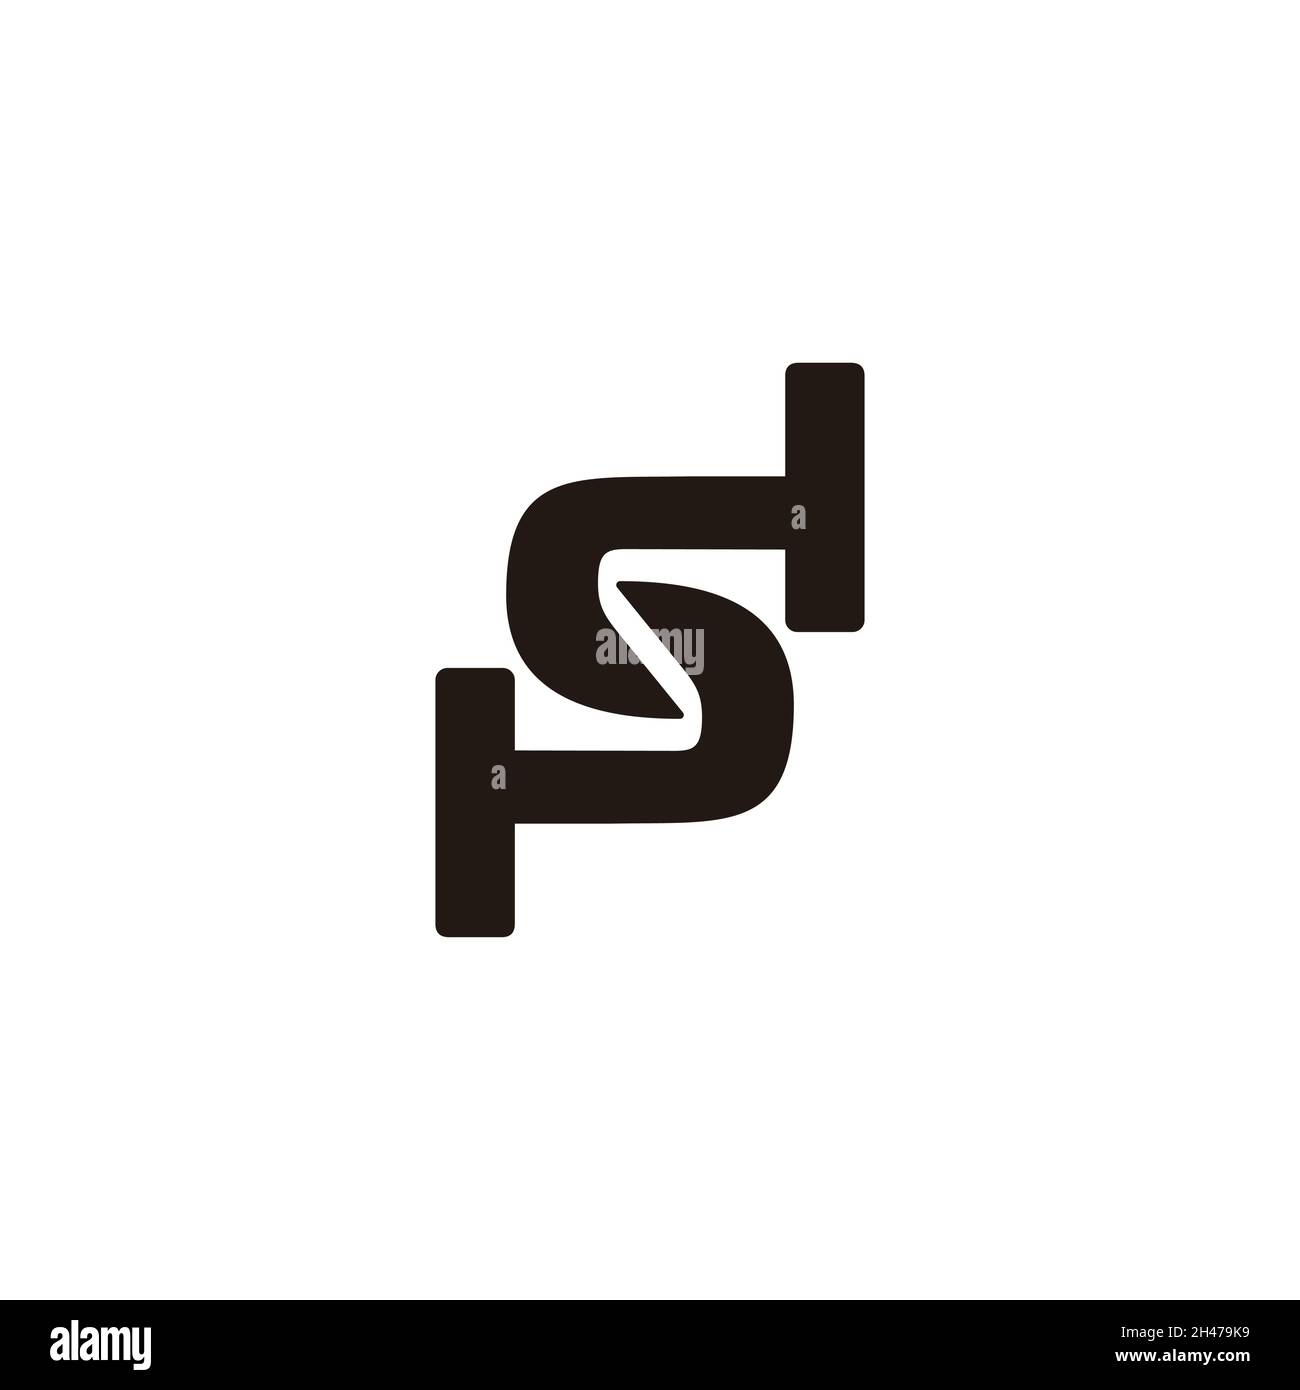 Letter s and p Cut Out Stock Images & Pictures - Alamy